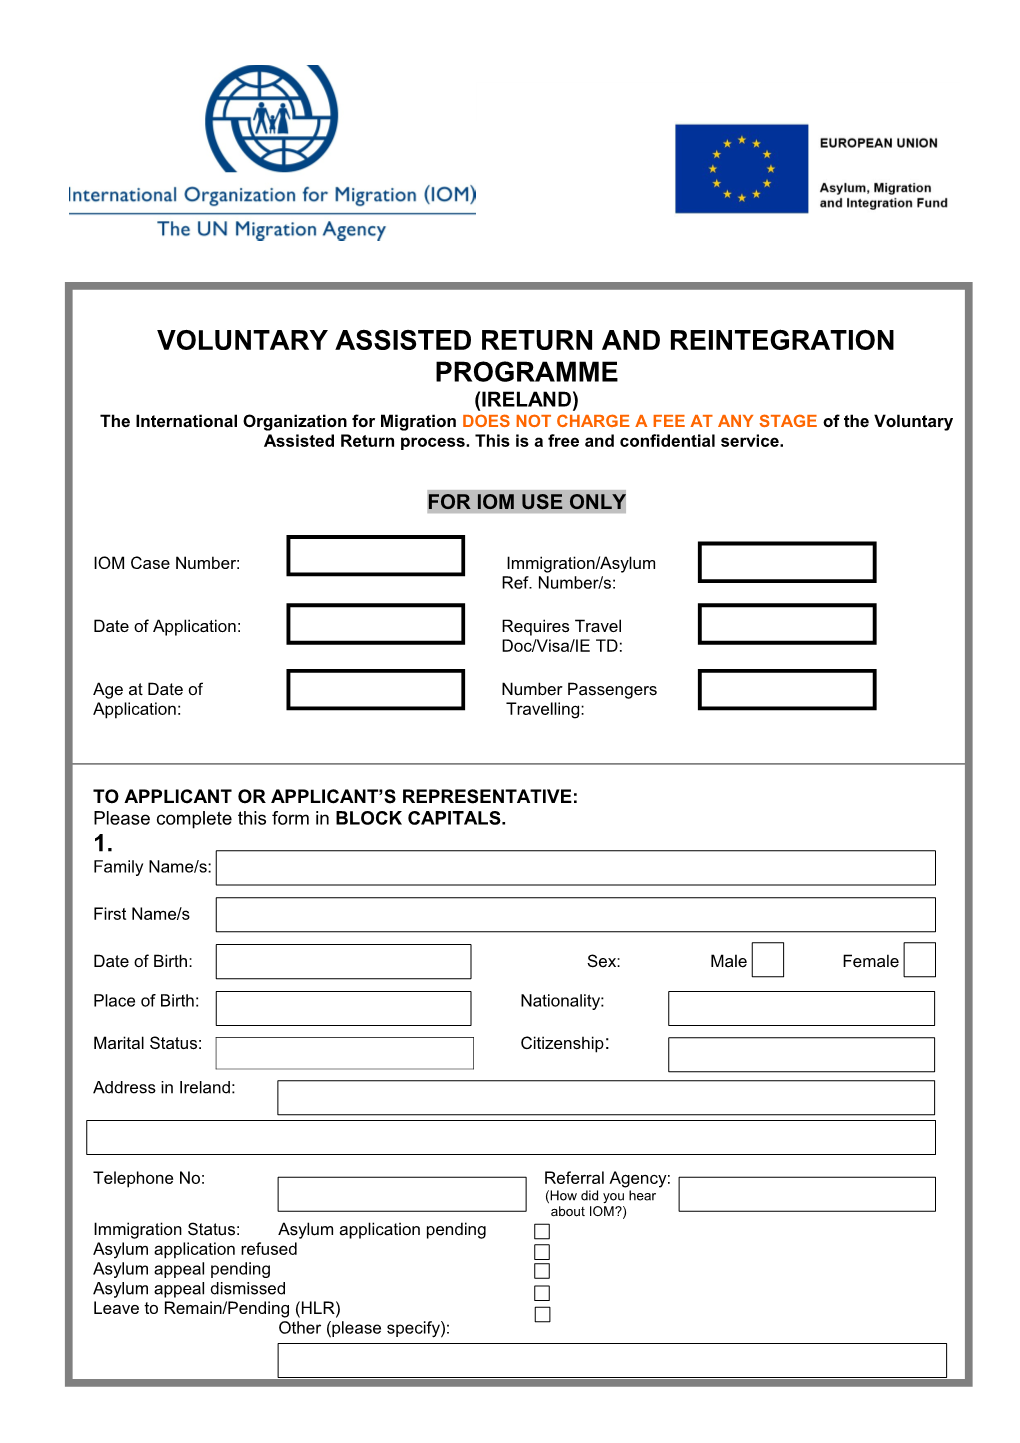 Voluntary Assisted Return and Reintegration Programme